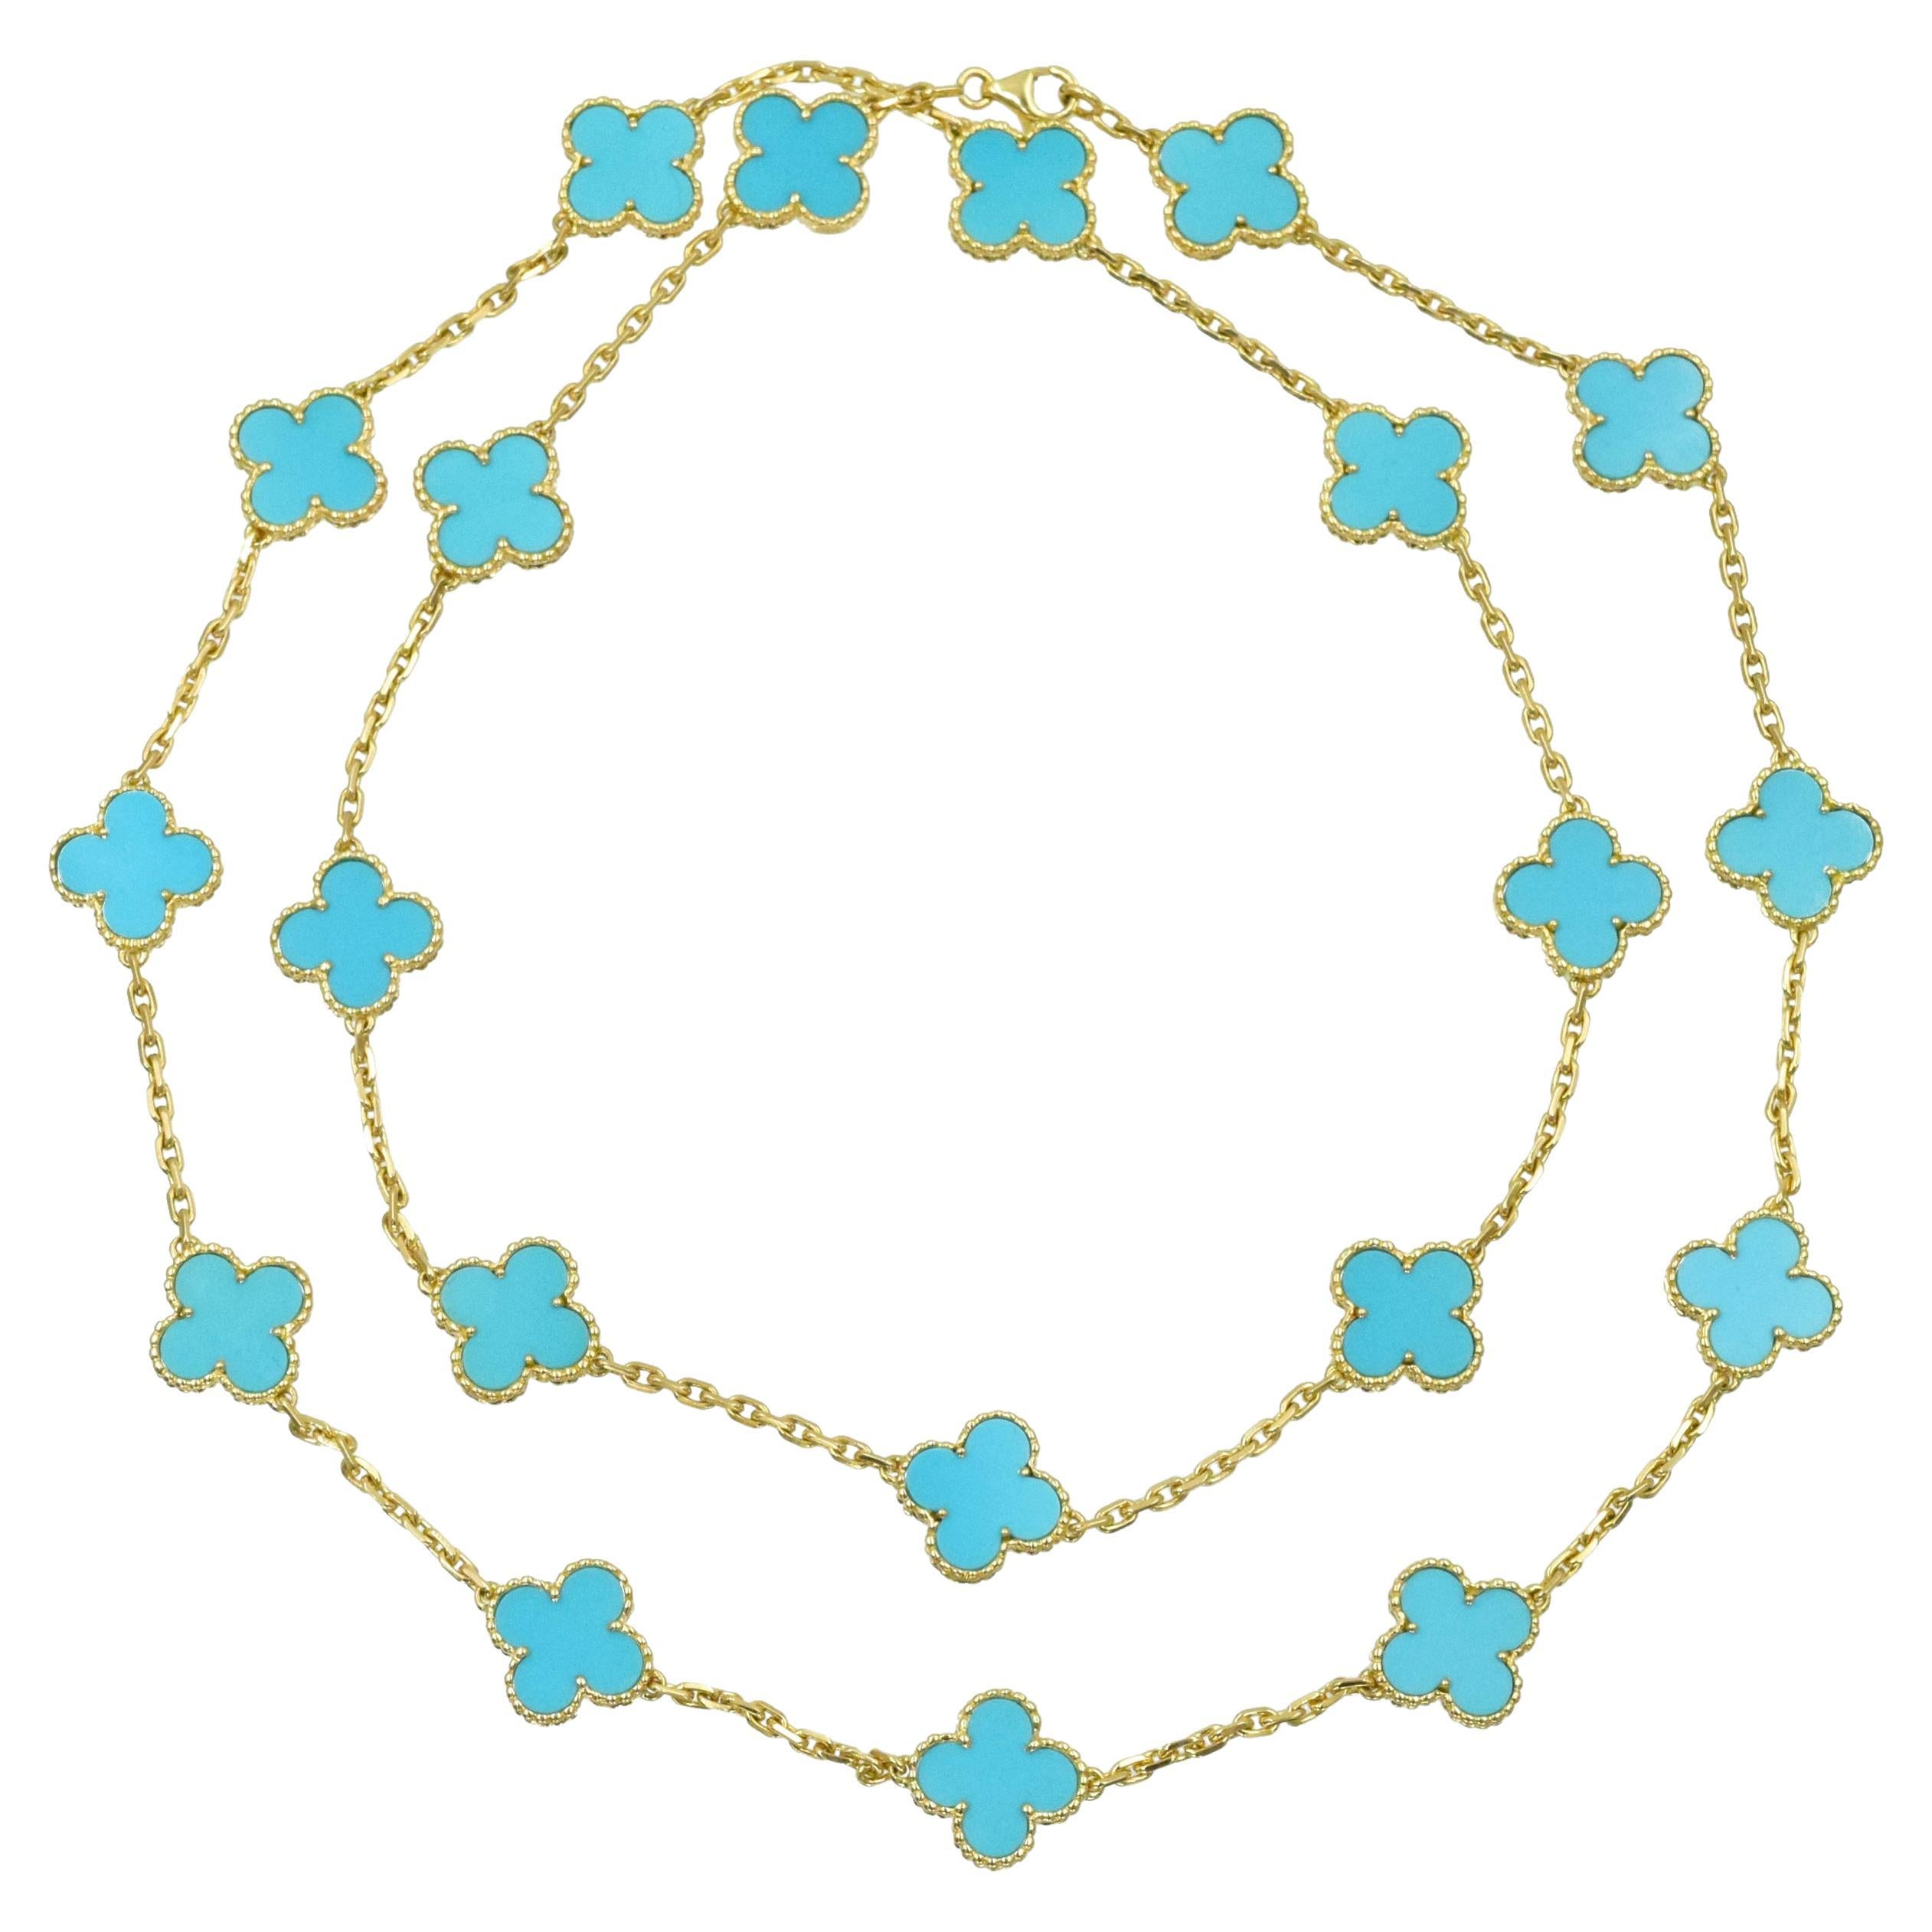 Van Cleef & Arpels 'Vintage Alhamrba' Turquoise Necklace. This necklace has
twenty motifs, turquoise plaques, all set in 18k yellow gold with chain,
Signed VCA, numbered, accompanied with VCA authenticity paper work
Length:  33 3/8 in 
Made in France